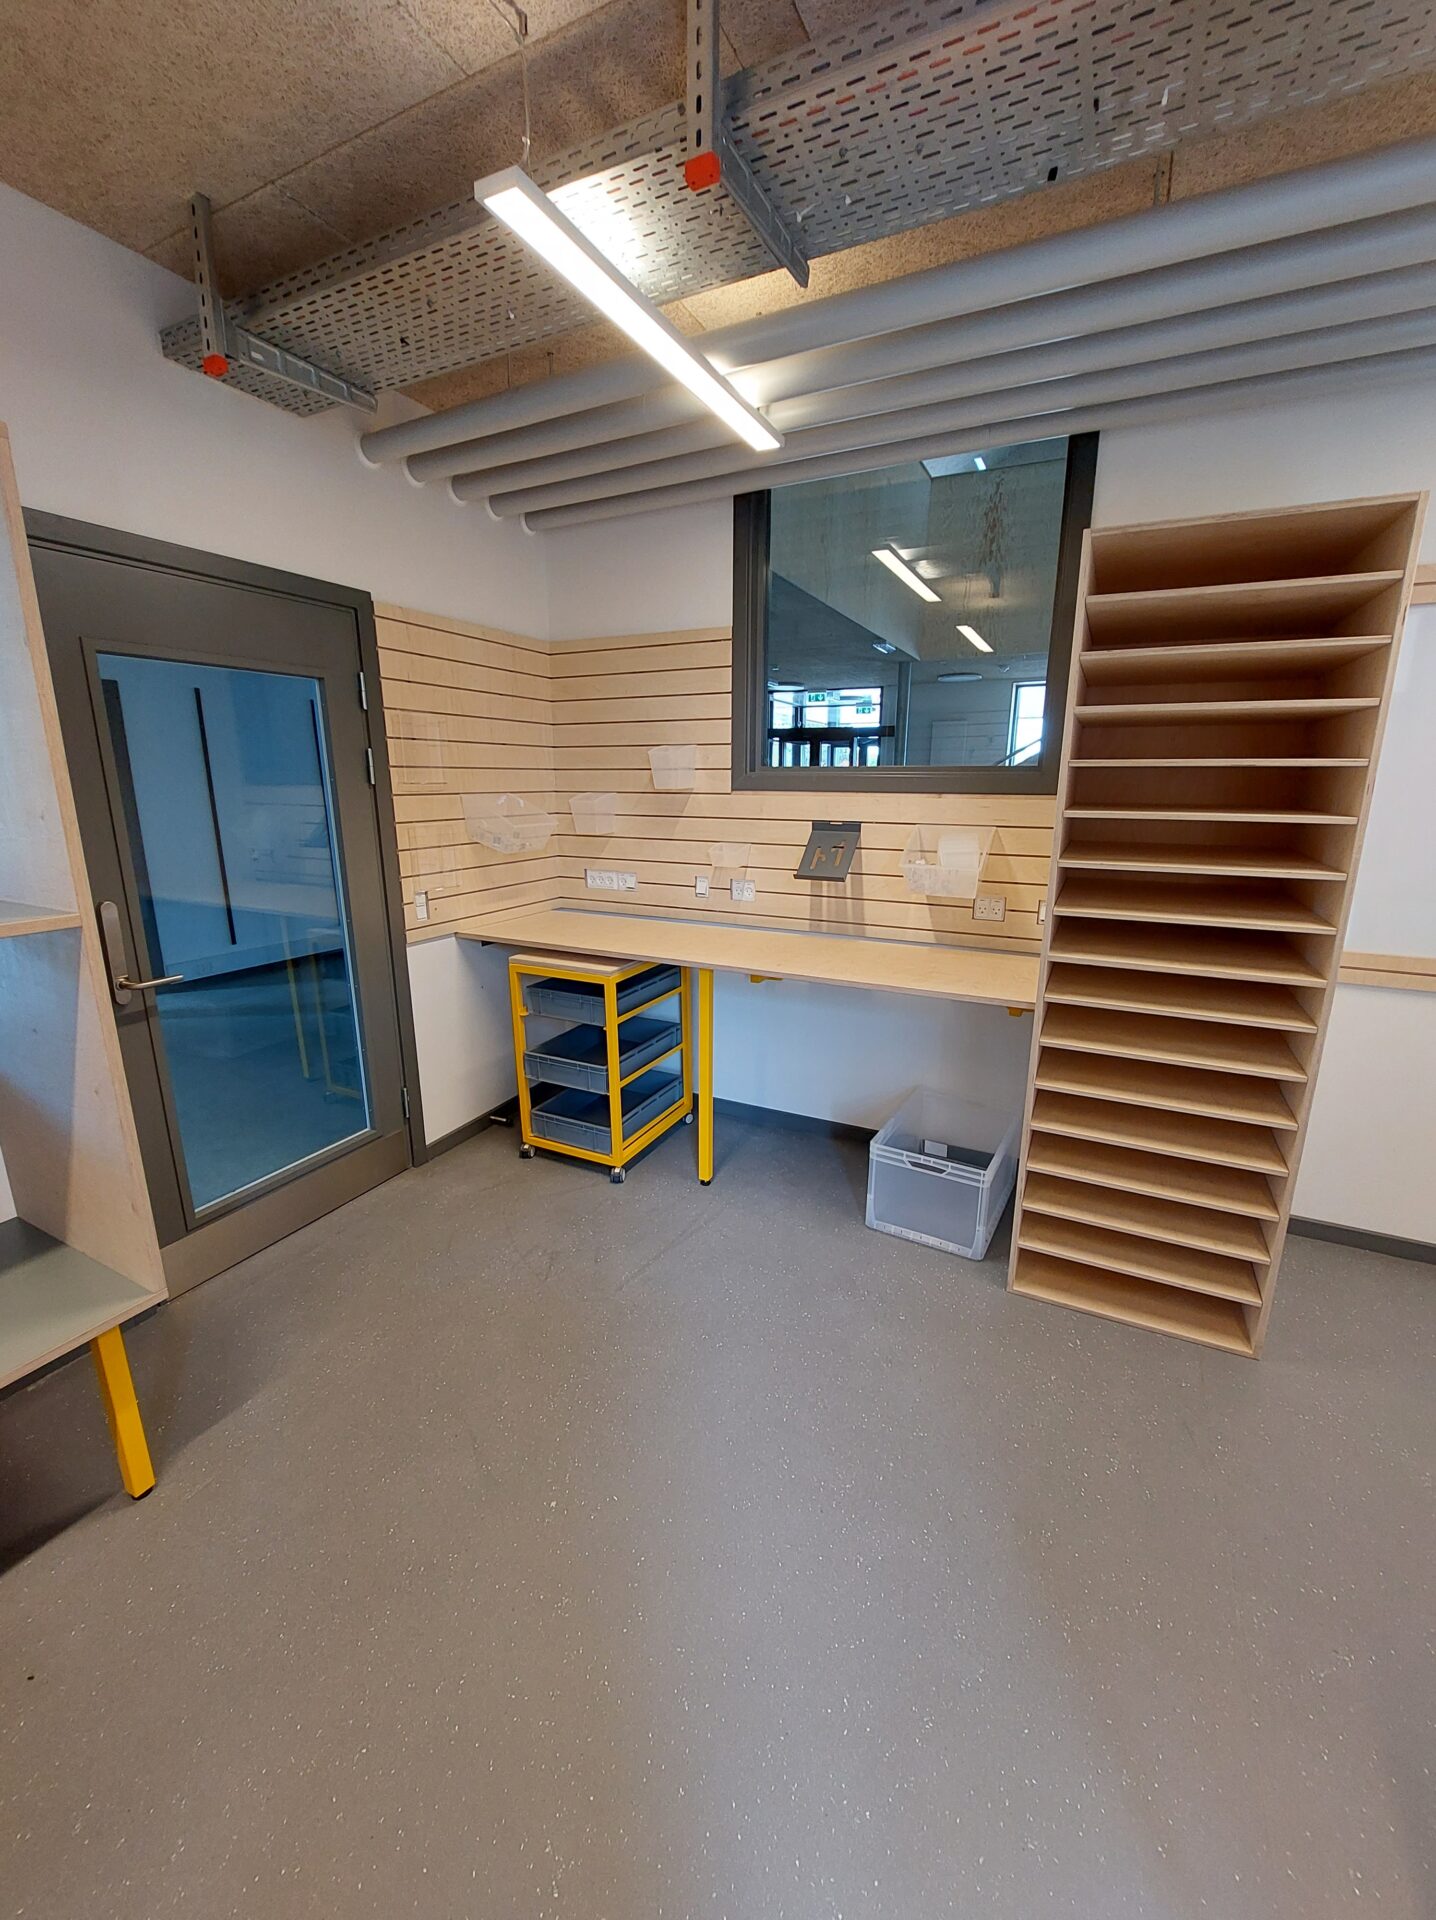 Makerspace - Osted Skole 4